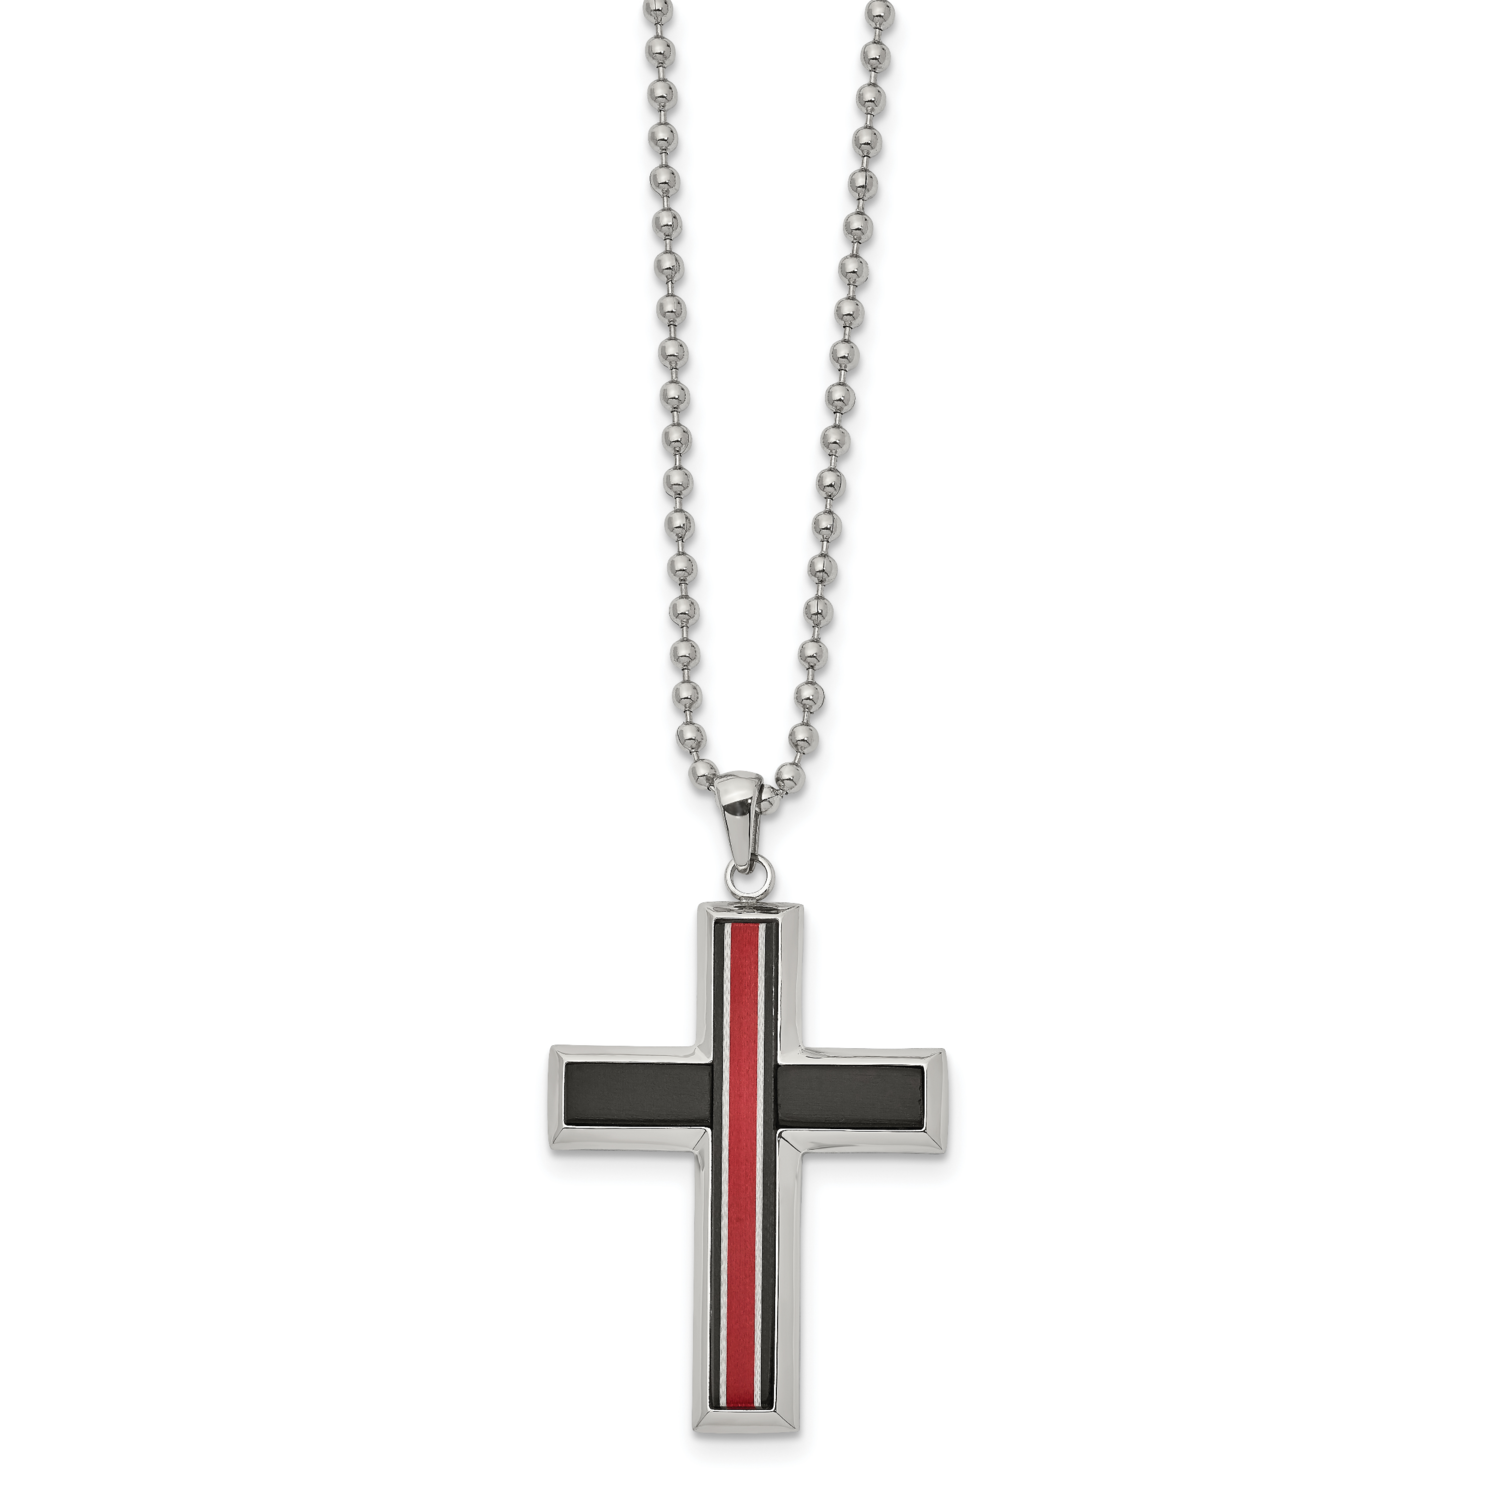 Polished Fiber Glass 22 Inch Cross Necklace Stainless Steel Brushed SRN2634-22